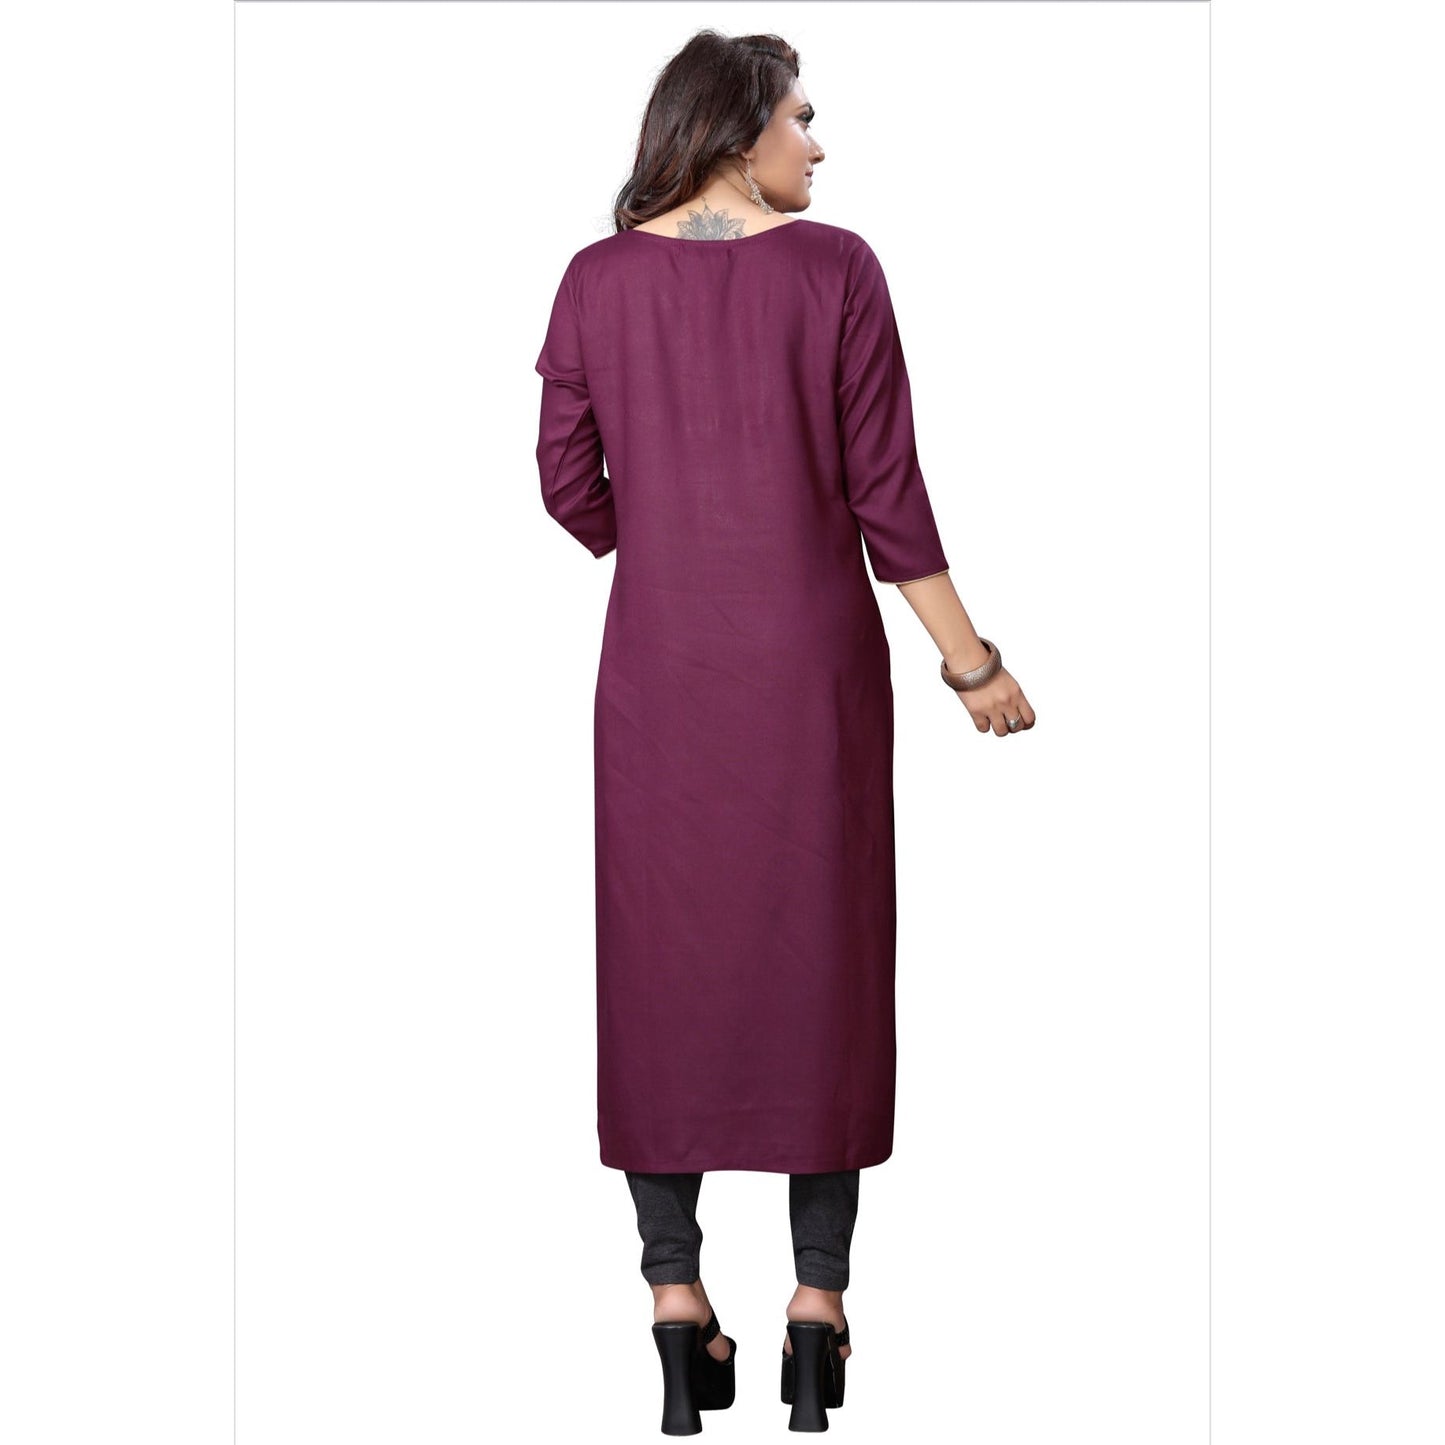 Plum colored Indian Tunic Top for women with Delicate Gold Piping